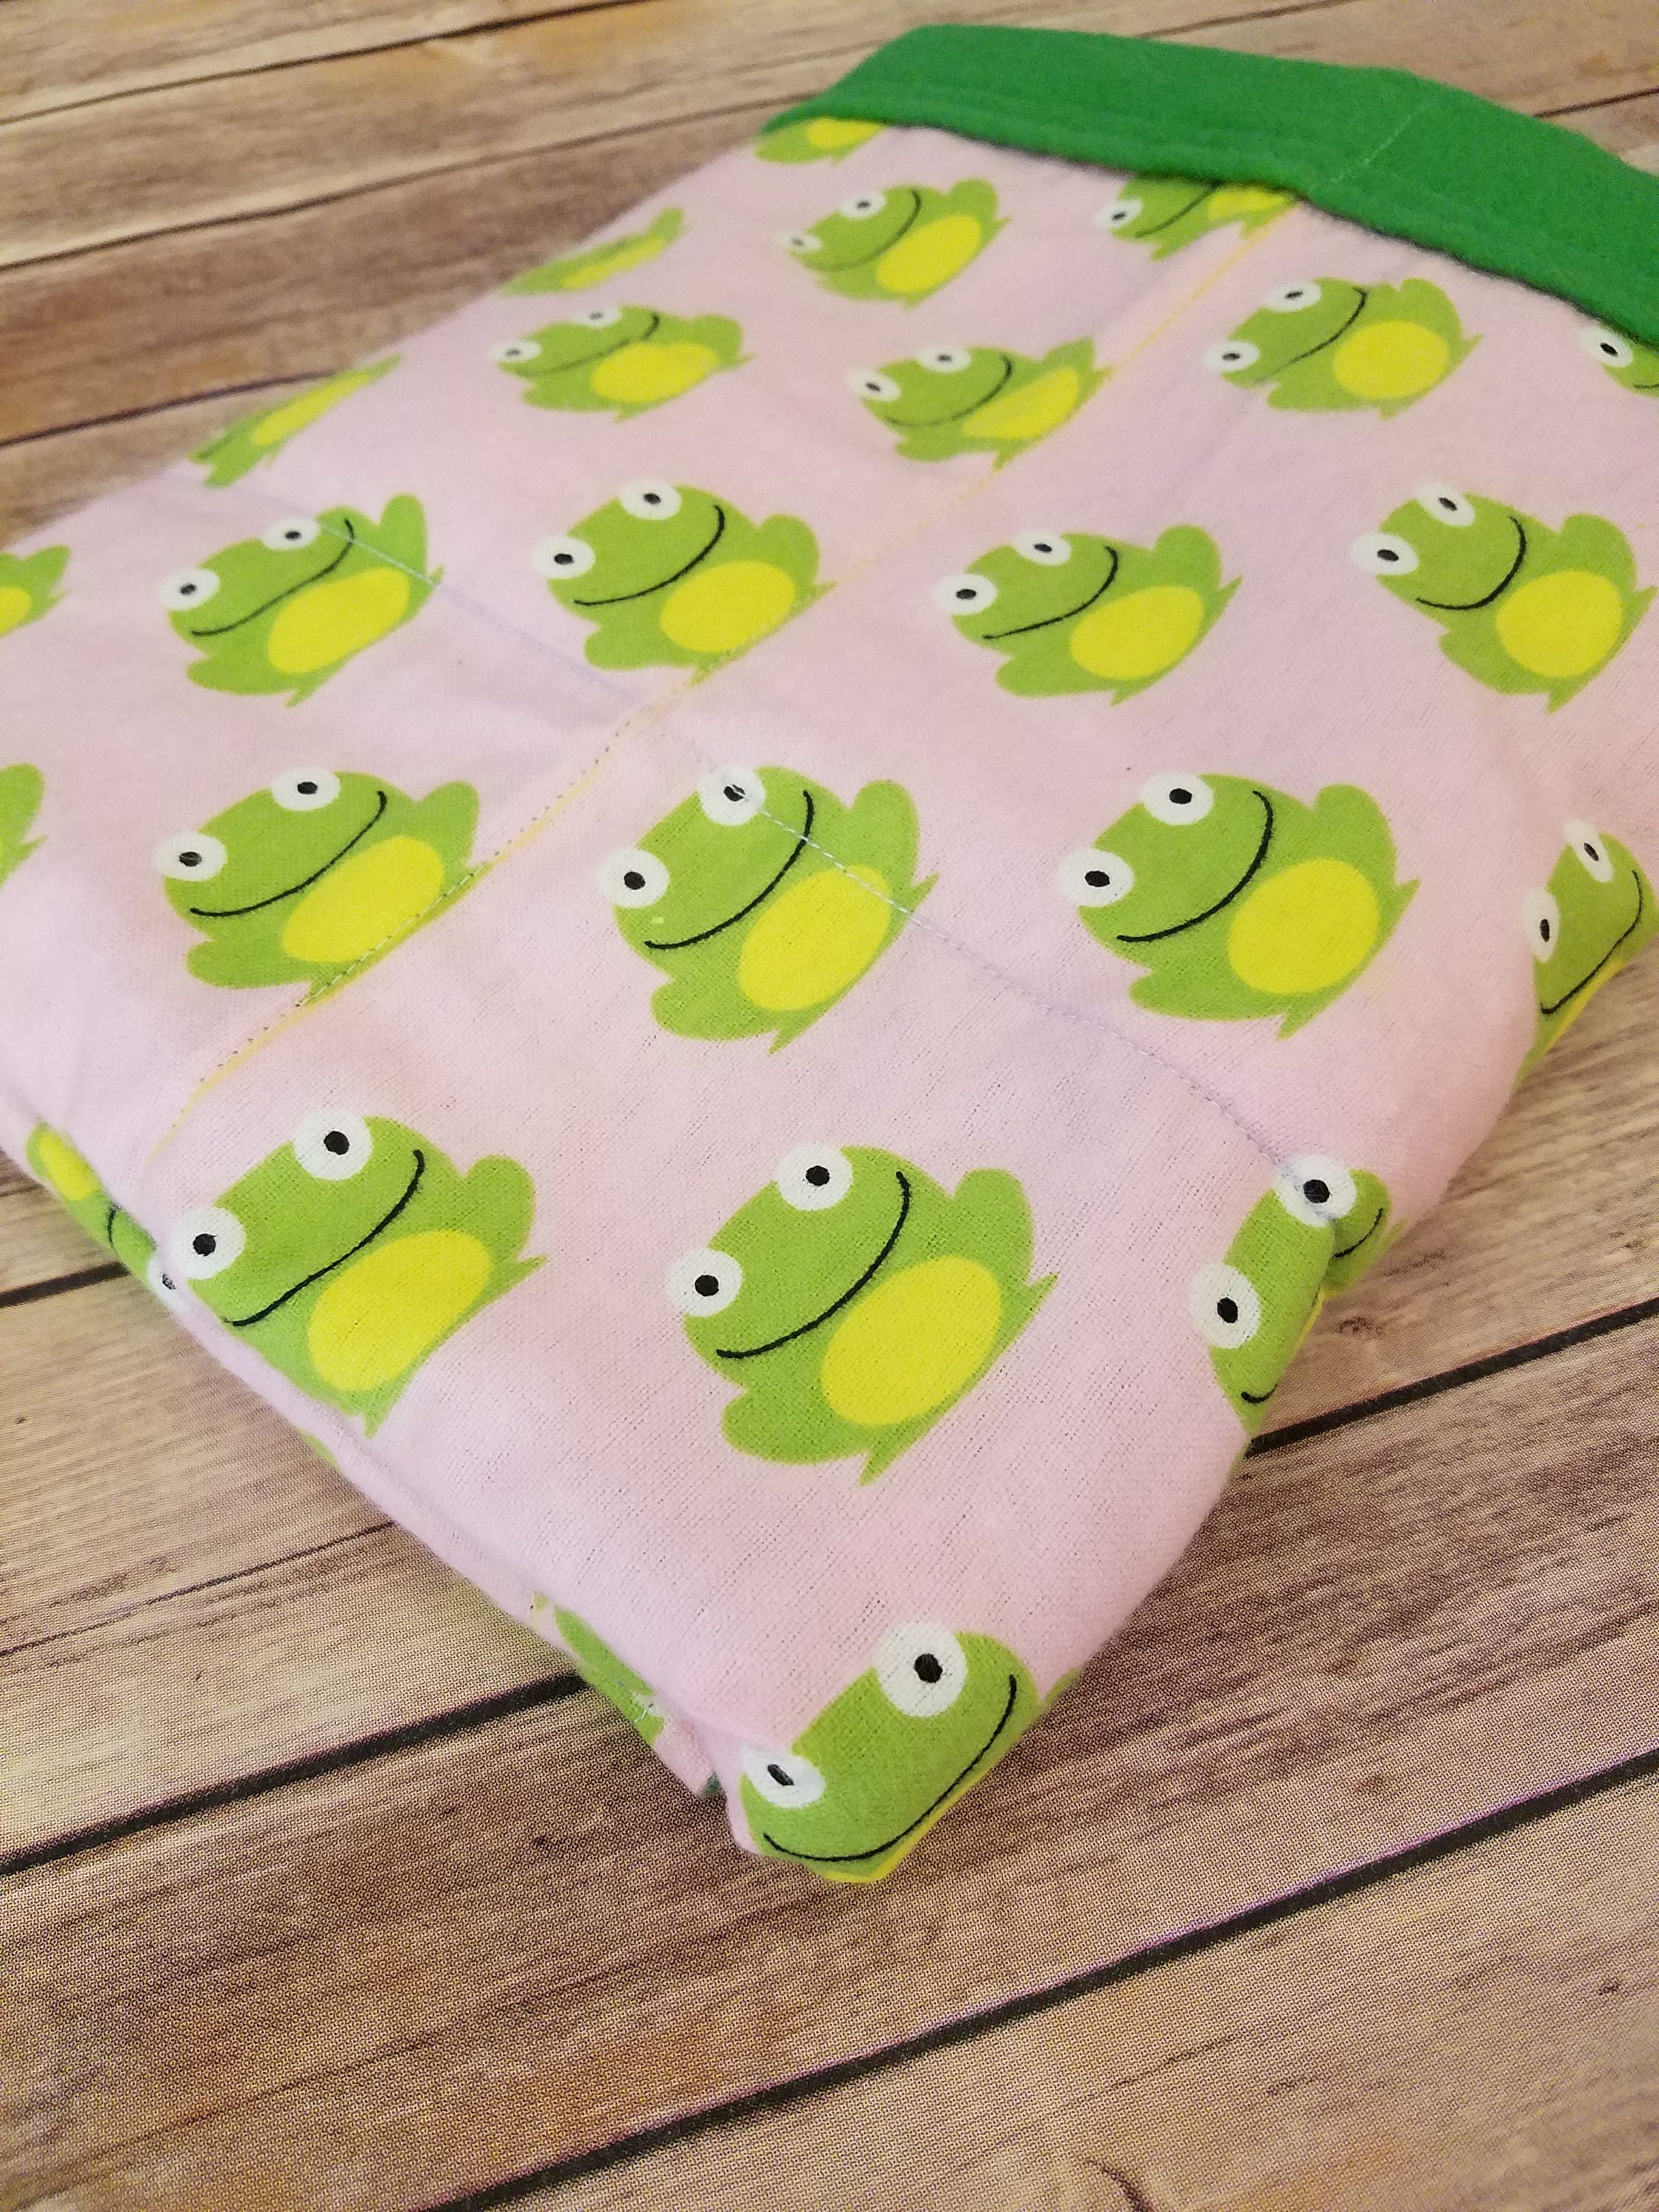 Frog, 3 Pound, WEIGHTED BLANKET, Ready To Ship, 3 pounds, 28x32 for